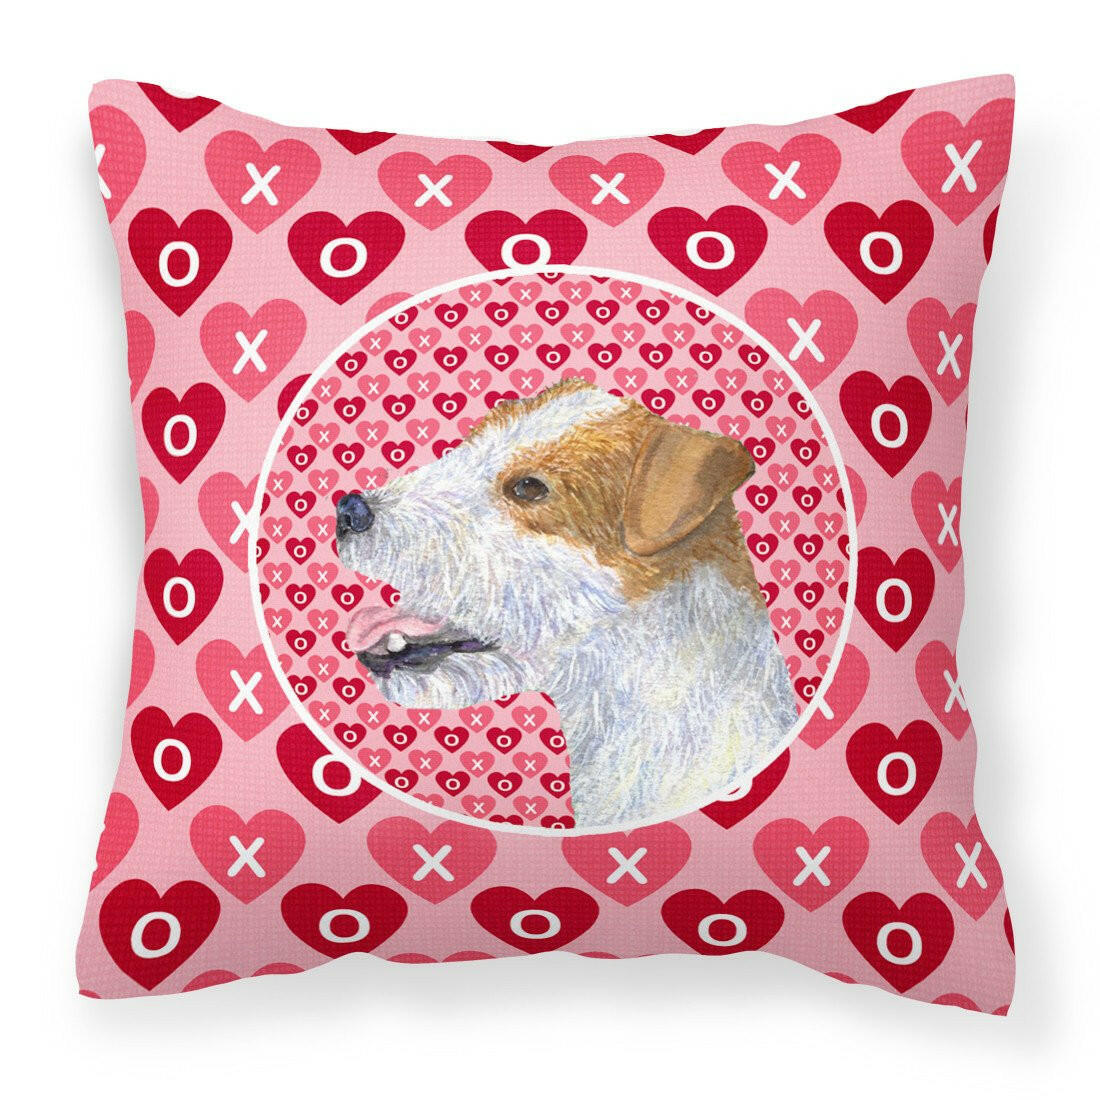 Jack Russell Terrier Hearts Love and Valentine's Day Portrait Fabric Decorative Pillow SS4504PW1414 by Caroline's Treasures